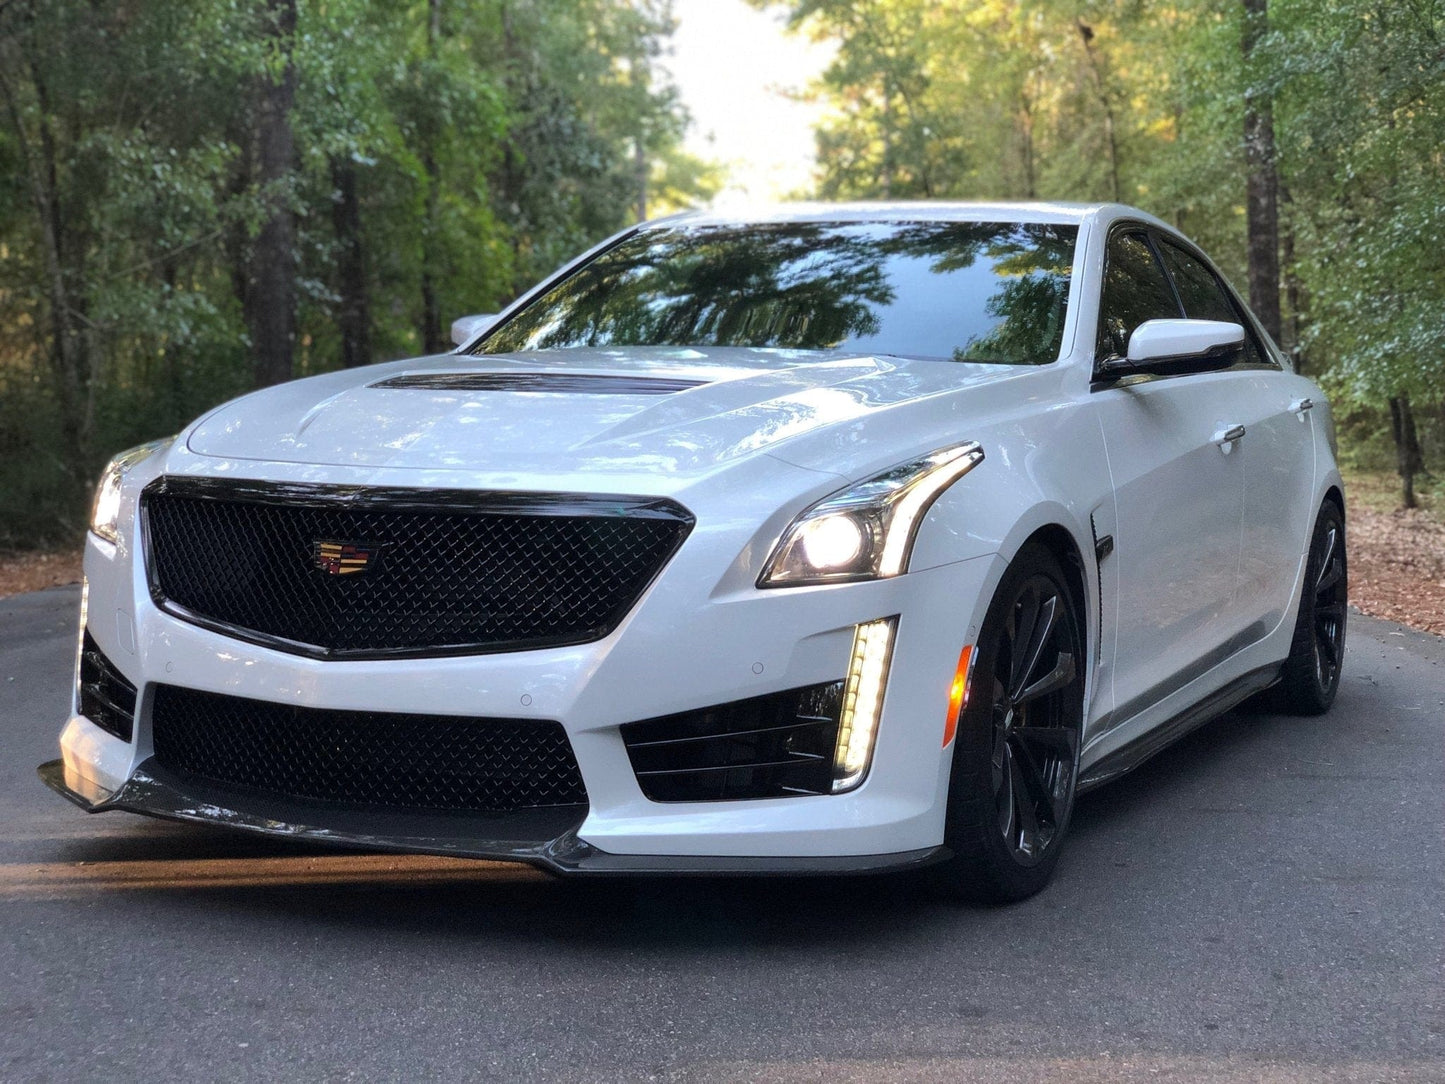 CTS-V Blacked Out Grille and Emblem Kit RENICK PERFORMANCE